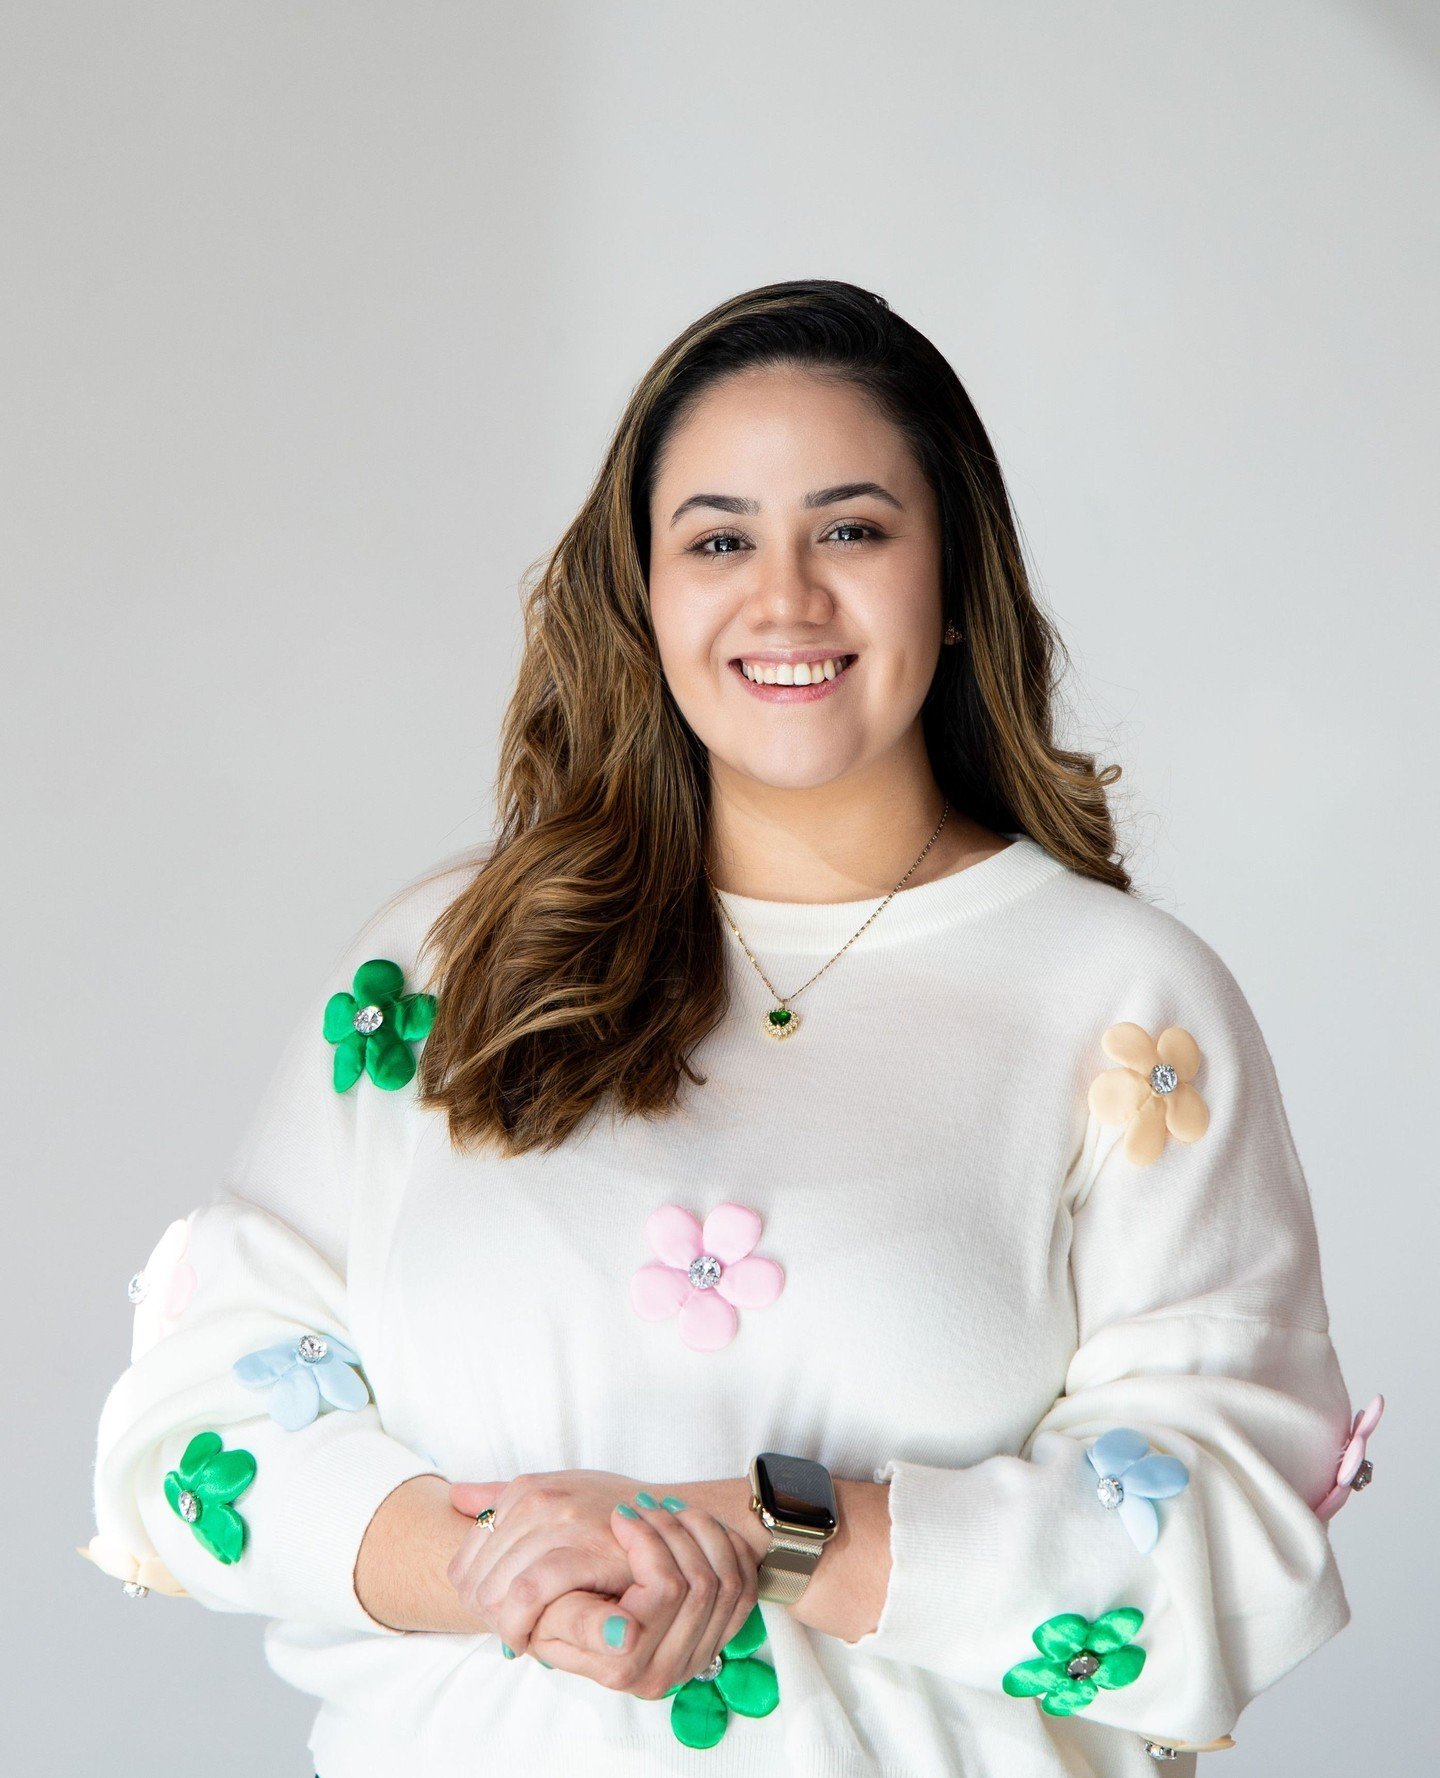 ✨️ Entrepreneur Spotlight ✨️⁠
⁠
Mirza was born and raised in Villanueva, Cort&eacute;s, Honduras, located in Central America, and has lived in Lincoln, Nebraska since September 2023. She graduated with a bachelor's degree in Tourism Administration fr